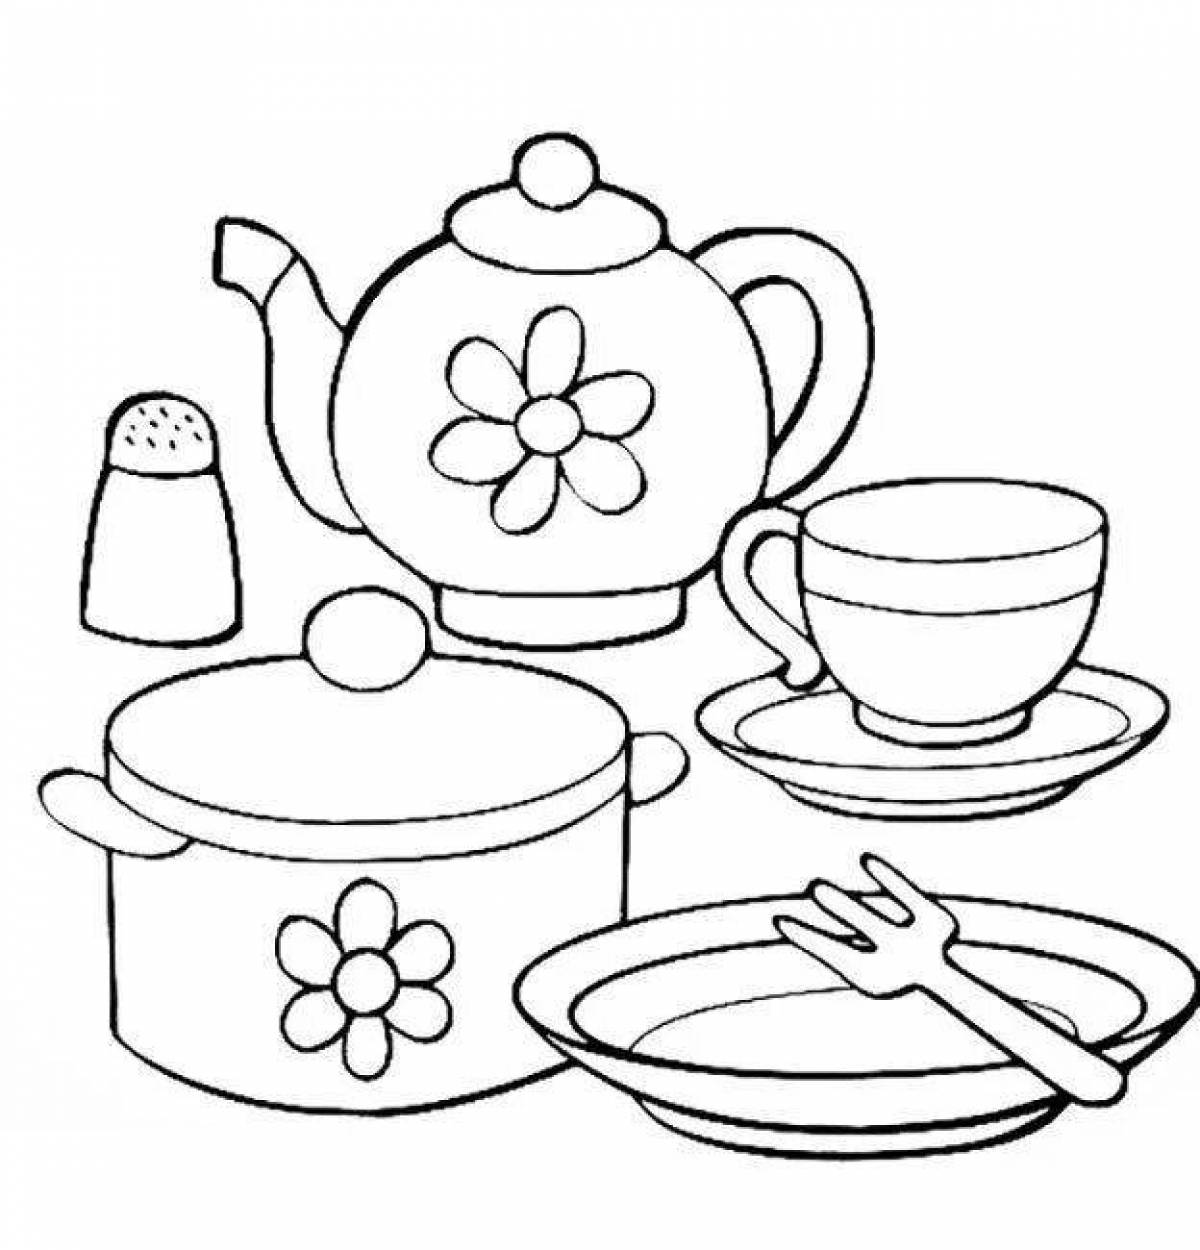 On the topic of tableware in the middle group #1